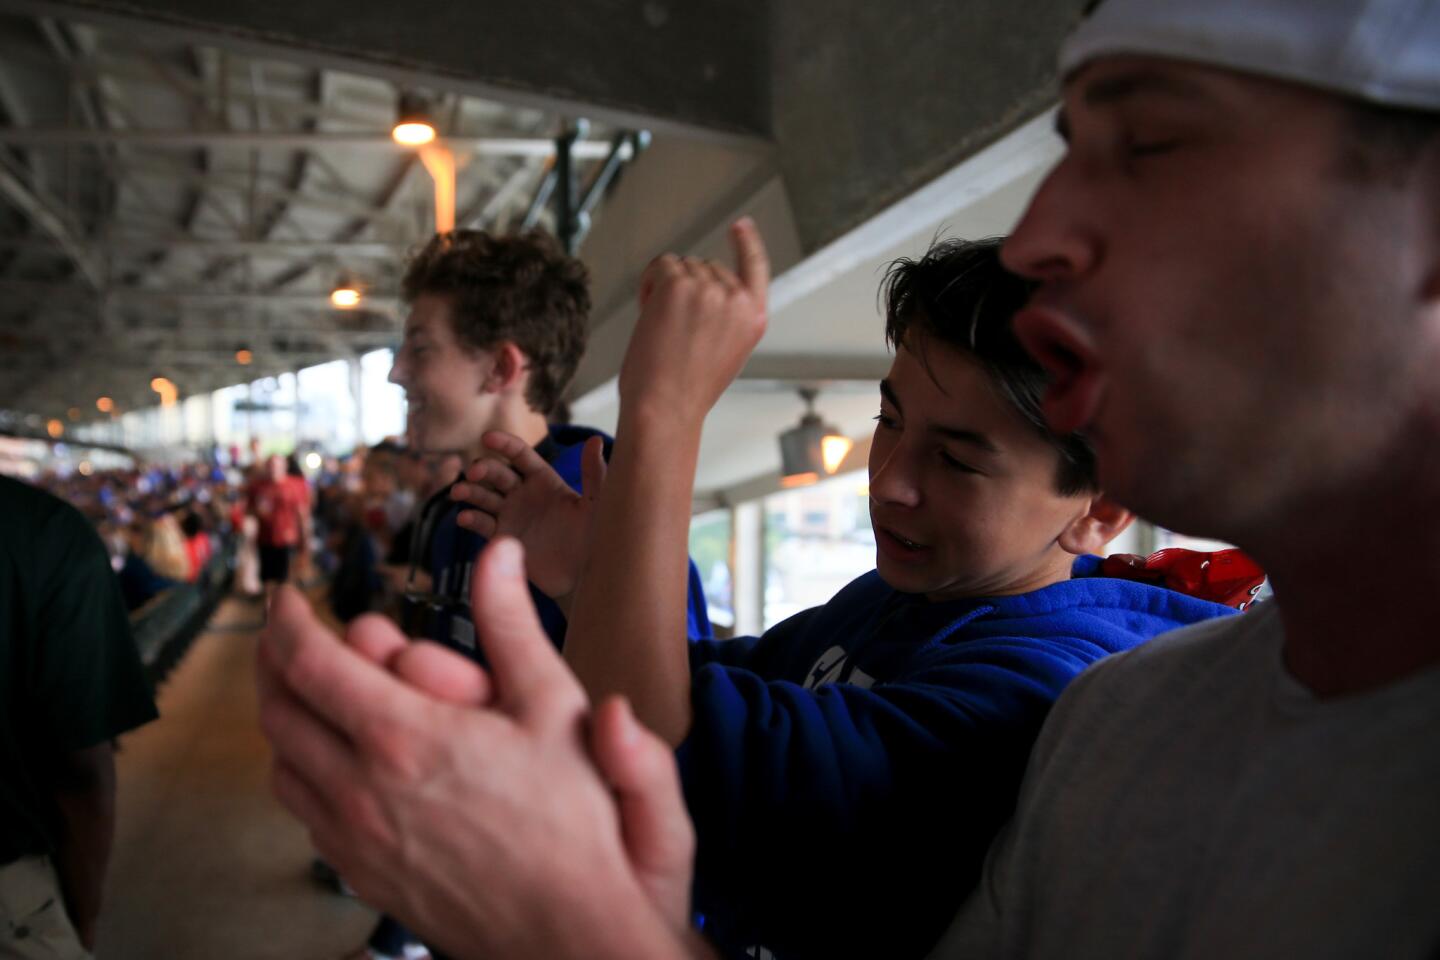 Will Bonacio, from left, Luca Bonacio and Brian Cheeseman cheer from the standing-room-only section during the Cubs vs. Cardinals game Sept. 18, 2015.